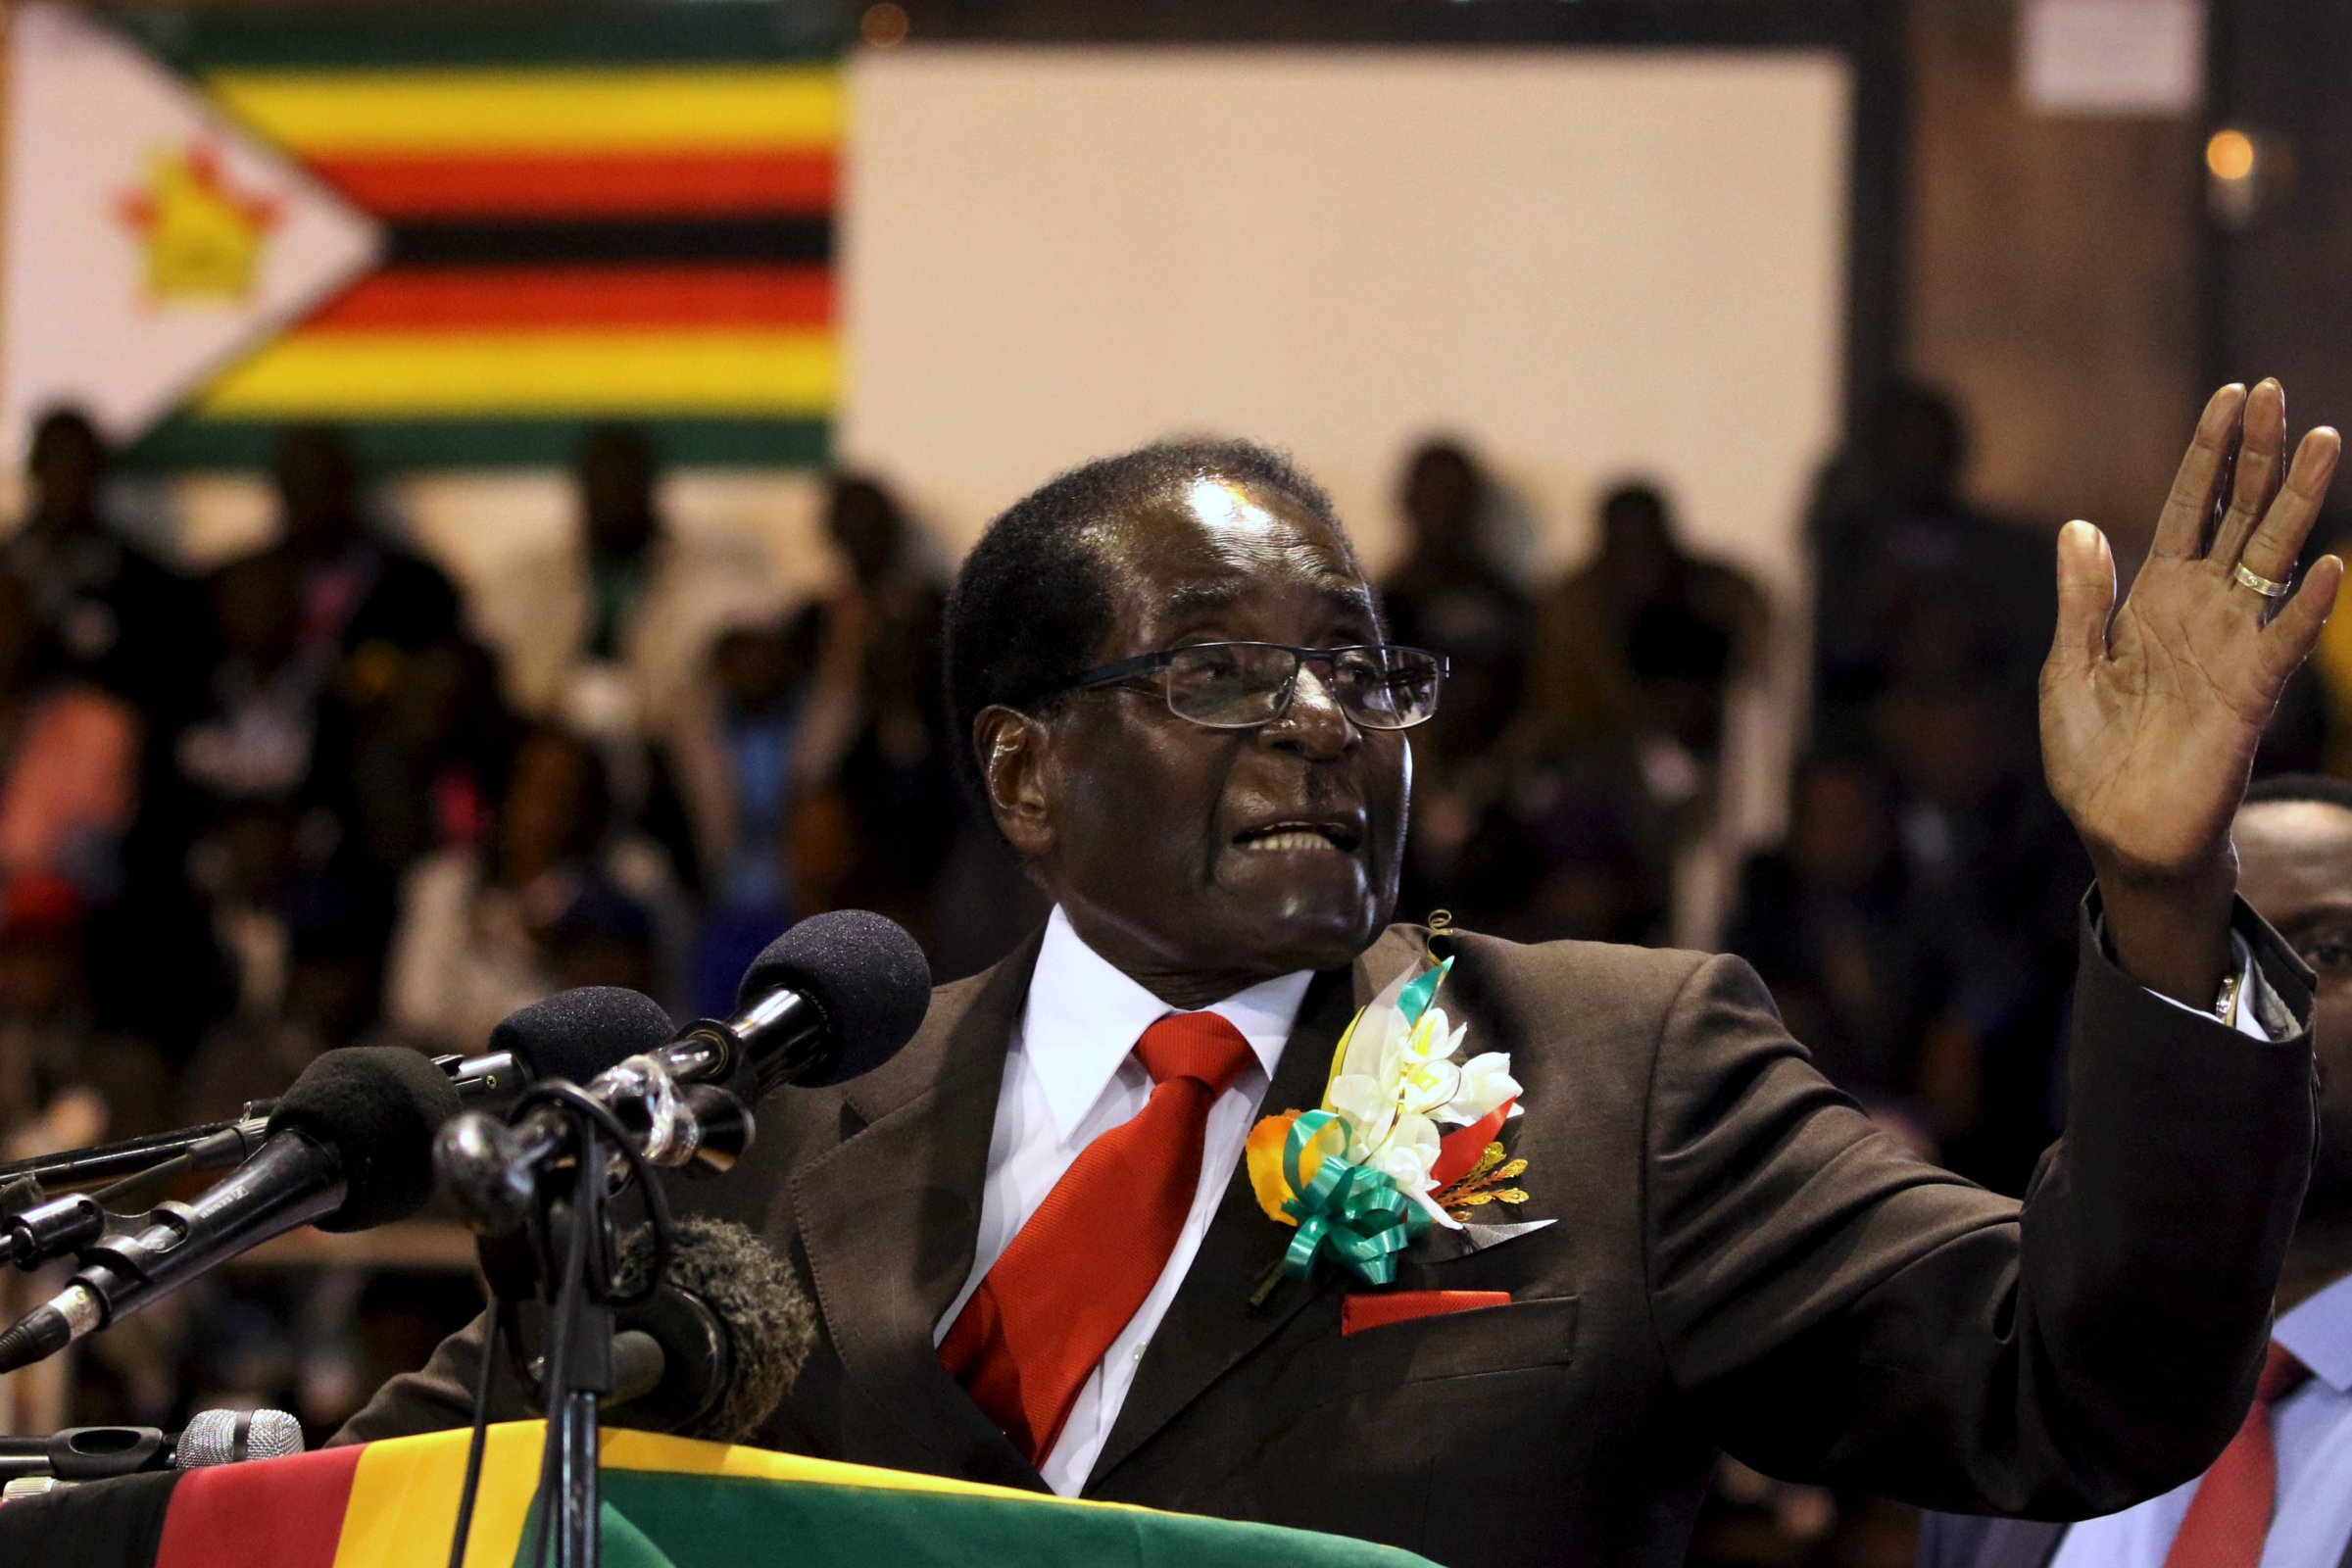 Zimbabwe's President Robert Mugabe gestures while addressing a meeting of veterans of the country's independence war in the capital Harare